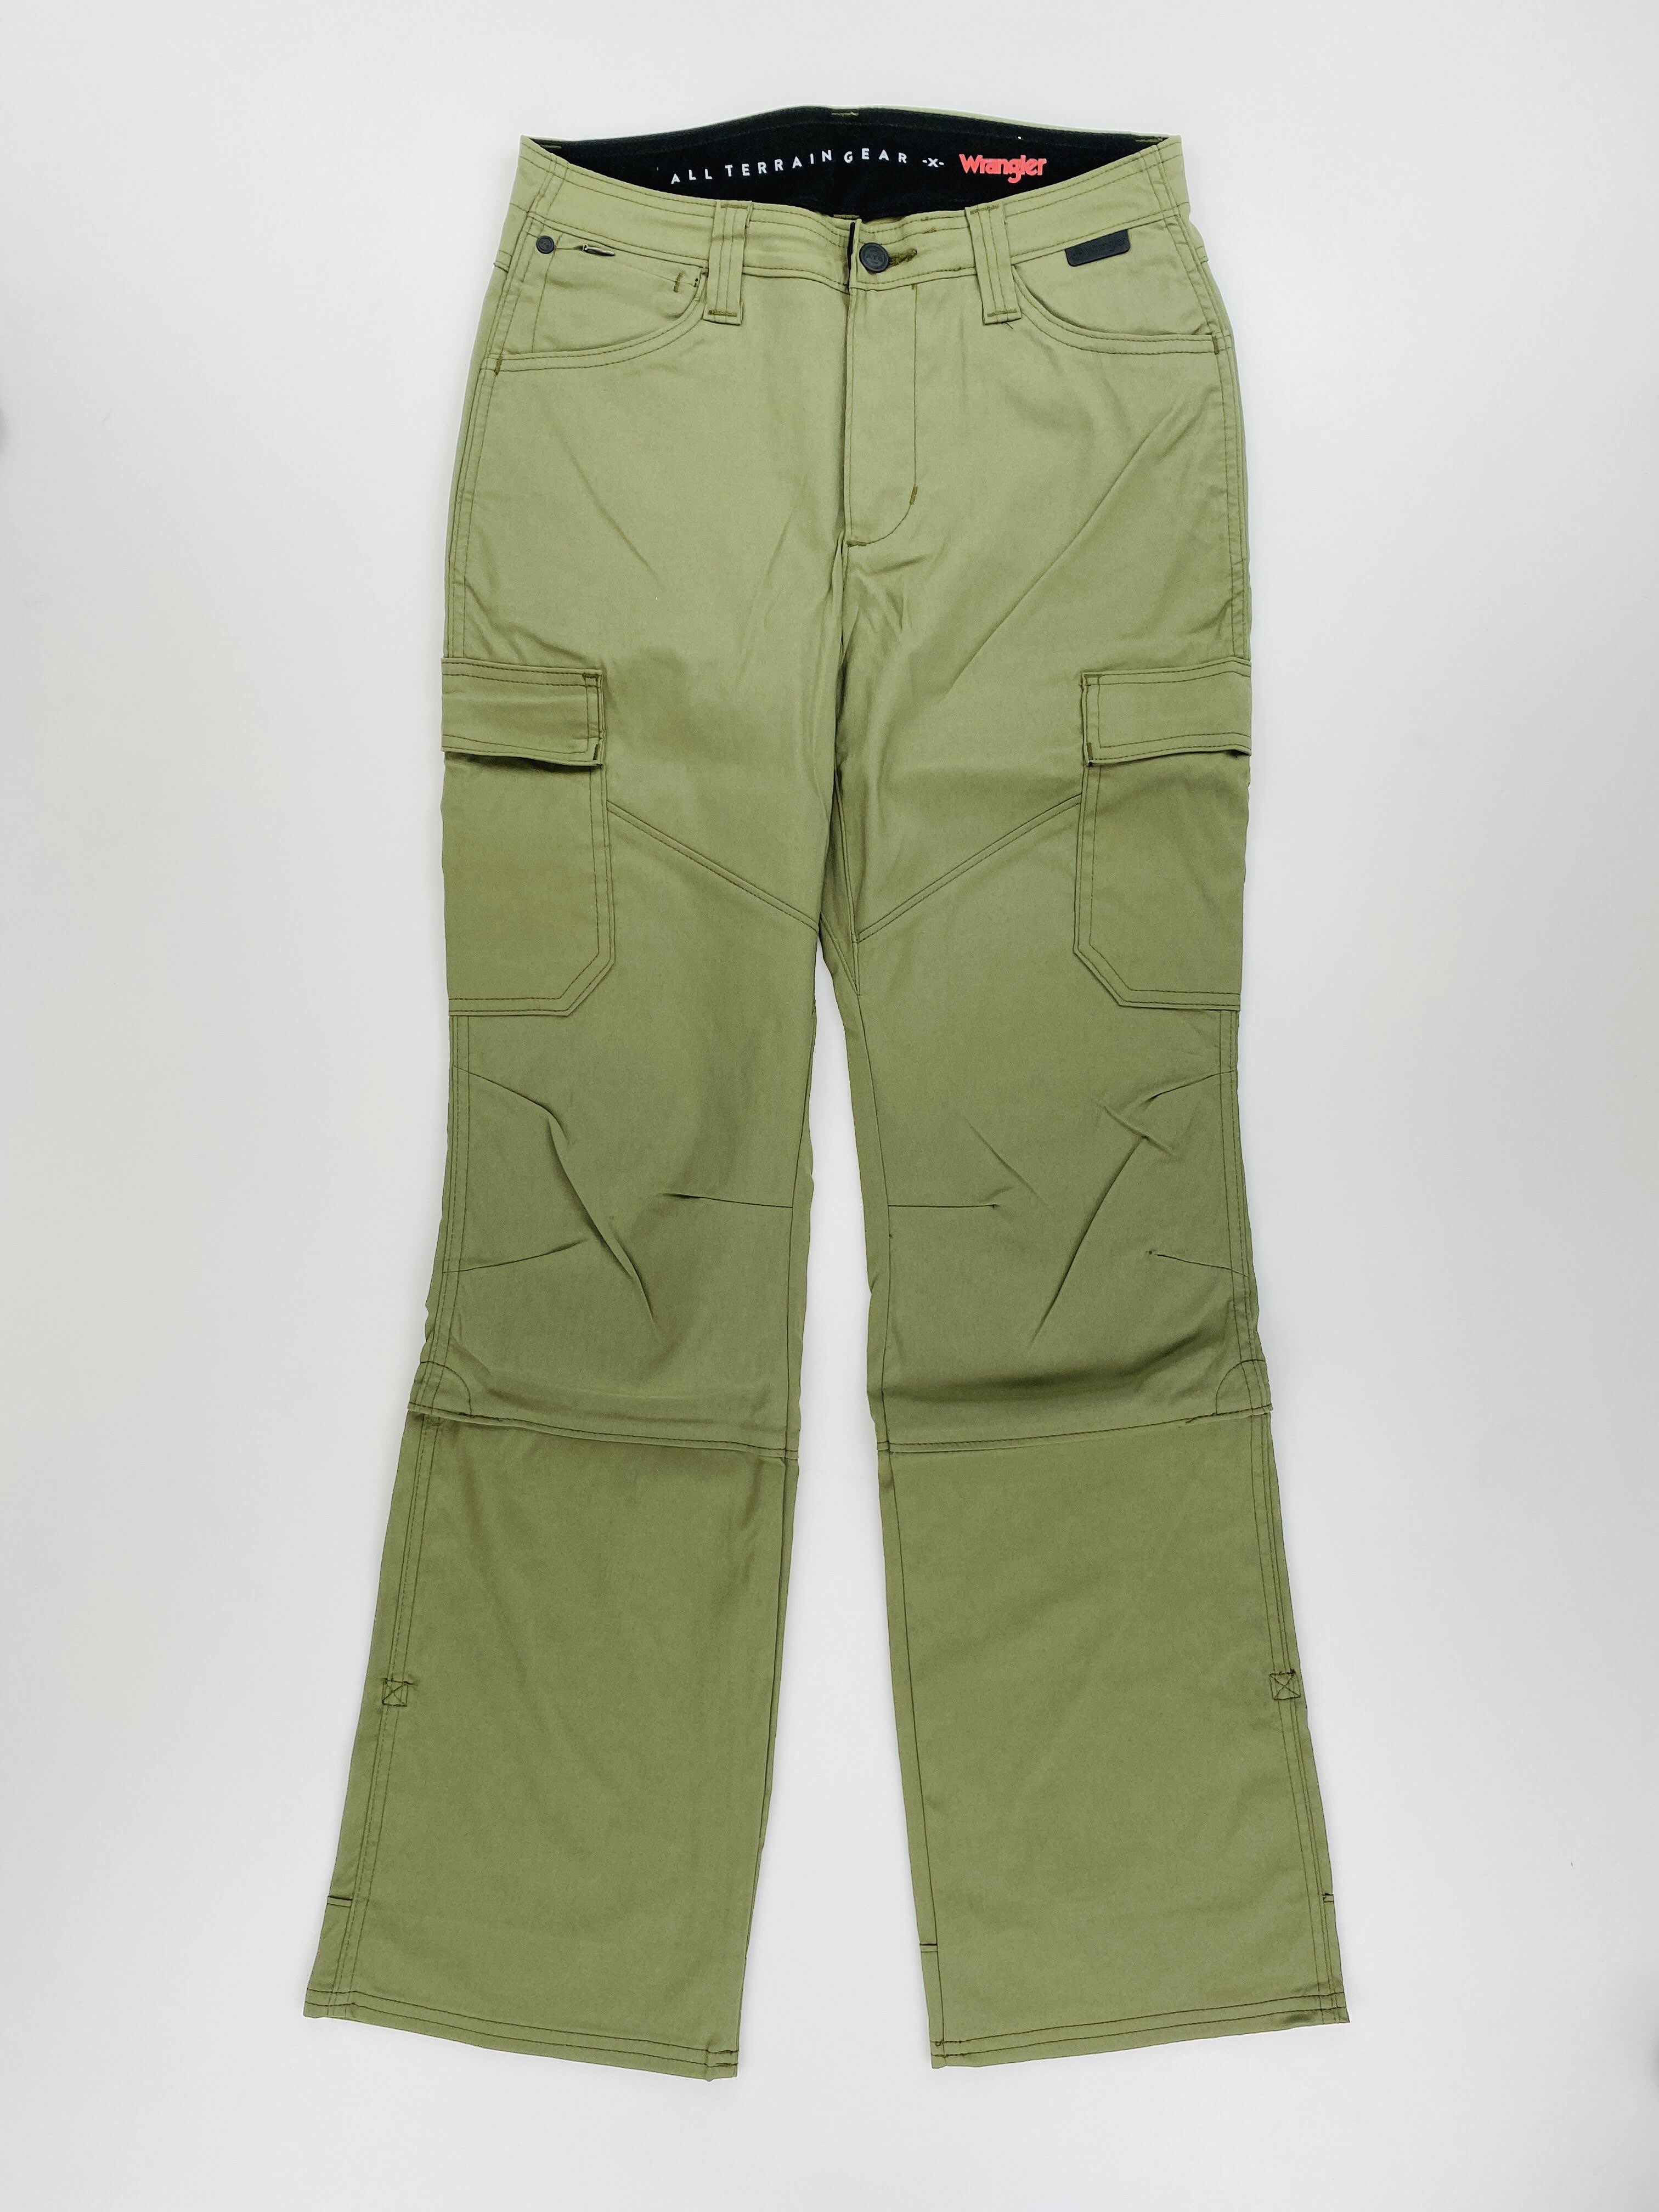 Wrangler Cargo Bootcut Conver - Second Hand Walking trousers - Women's - Olive green - US 28 | Hardloop